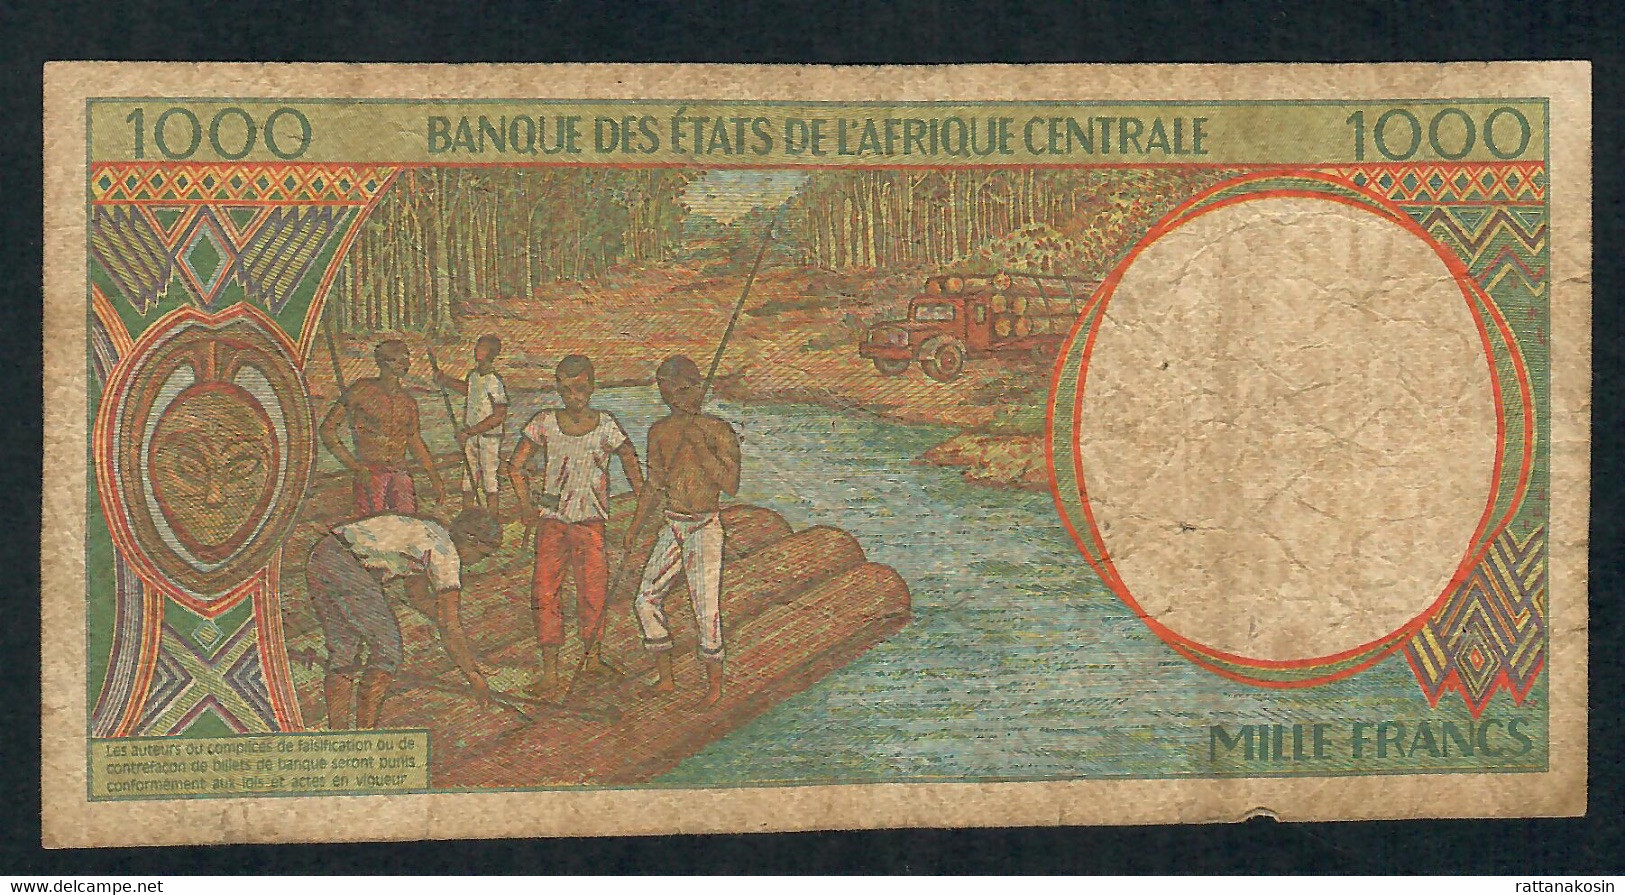 CENTRAL AFRICAN STATES GABON P402Lc  1000  FRANCS 1995  VF - Centraal-Afrikaanse Staten